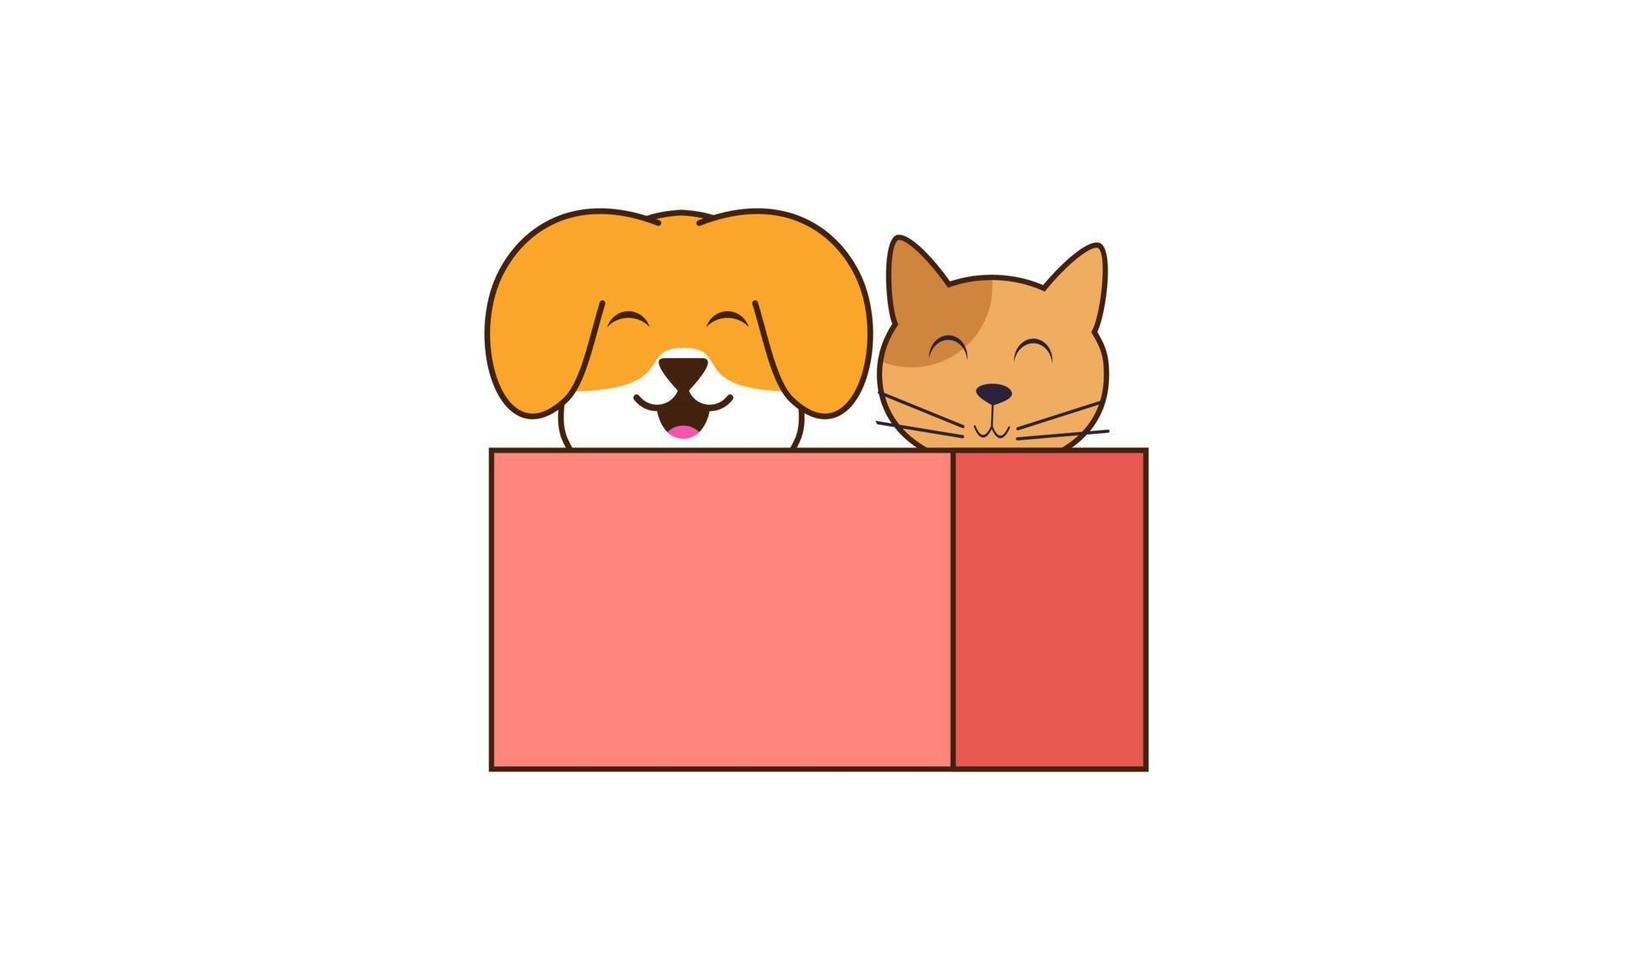 Cute cat and dog friend cartoon vector illustration. Animal friend icon concept